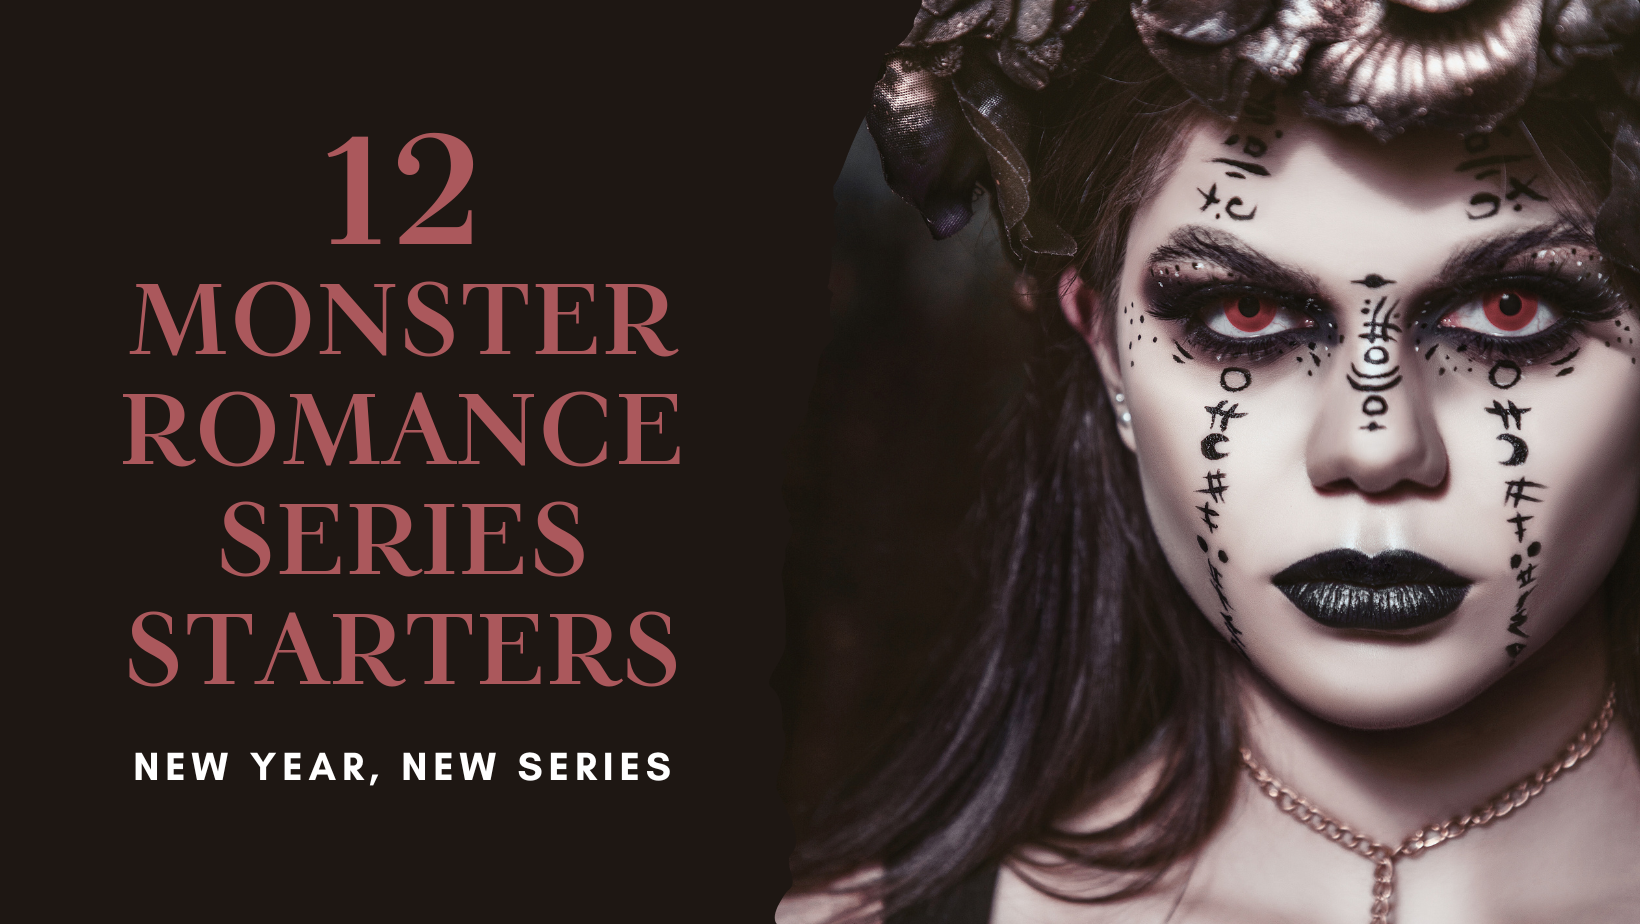 12 Monster Romance Series Starters for the New Year